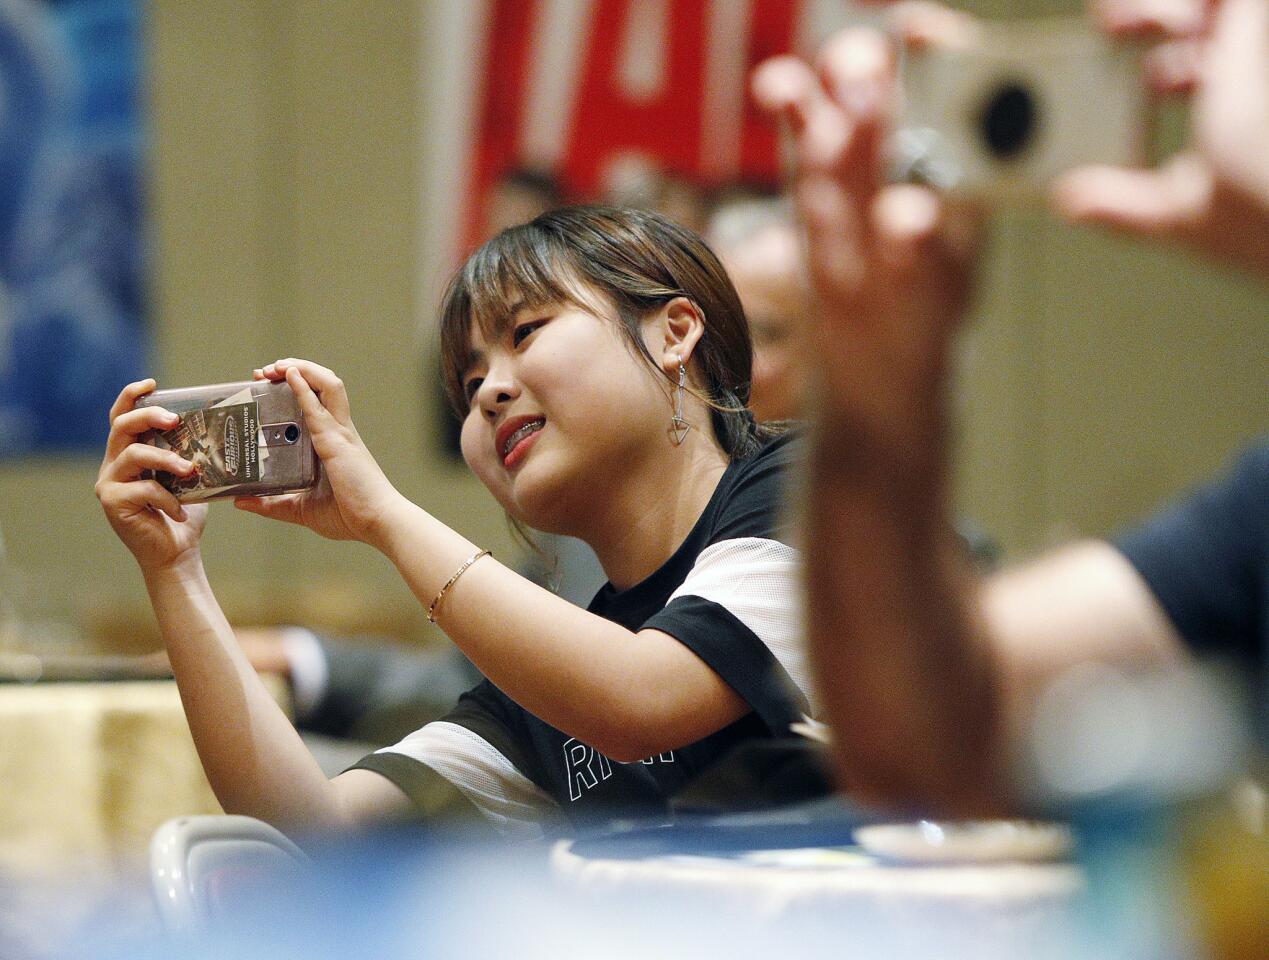 Korean student Uiju Han makes a cell phone video of the Burbank Students as they perform at a farewell dinner for a group of young Koreans visiting Burbank from Korea through a Sister City program at the Glendale First United Methodist Church in Glendale on Thursday, July 5, 2018. Burbank Students performed first, and the Korean students performed, playing piano, dancing, and singing K-Pop music.